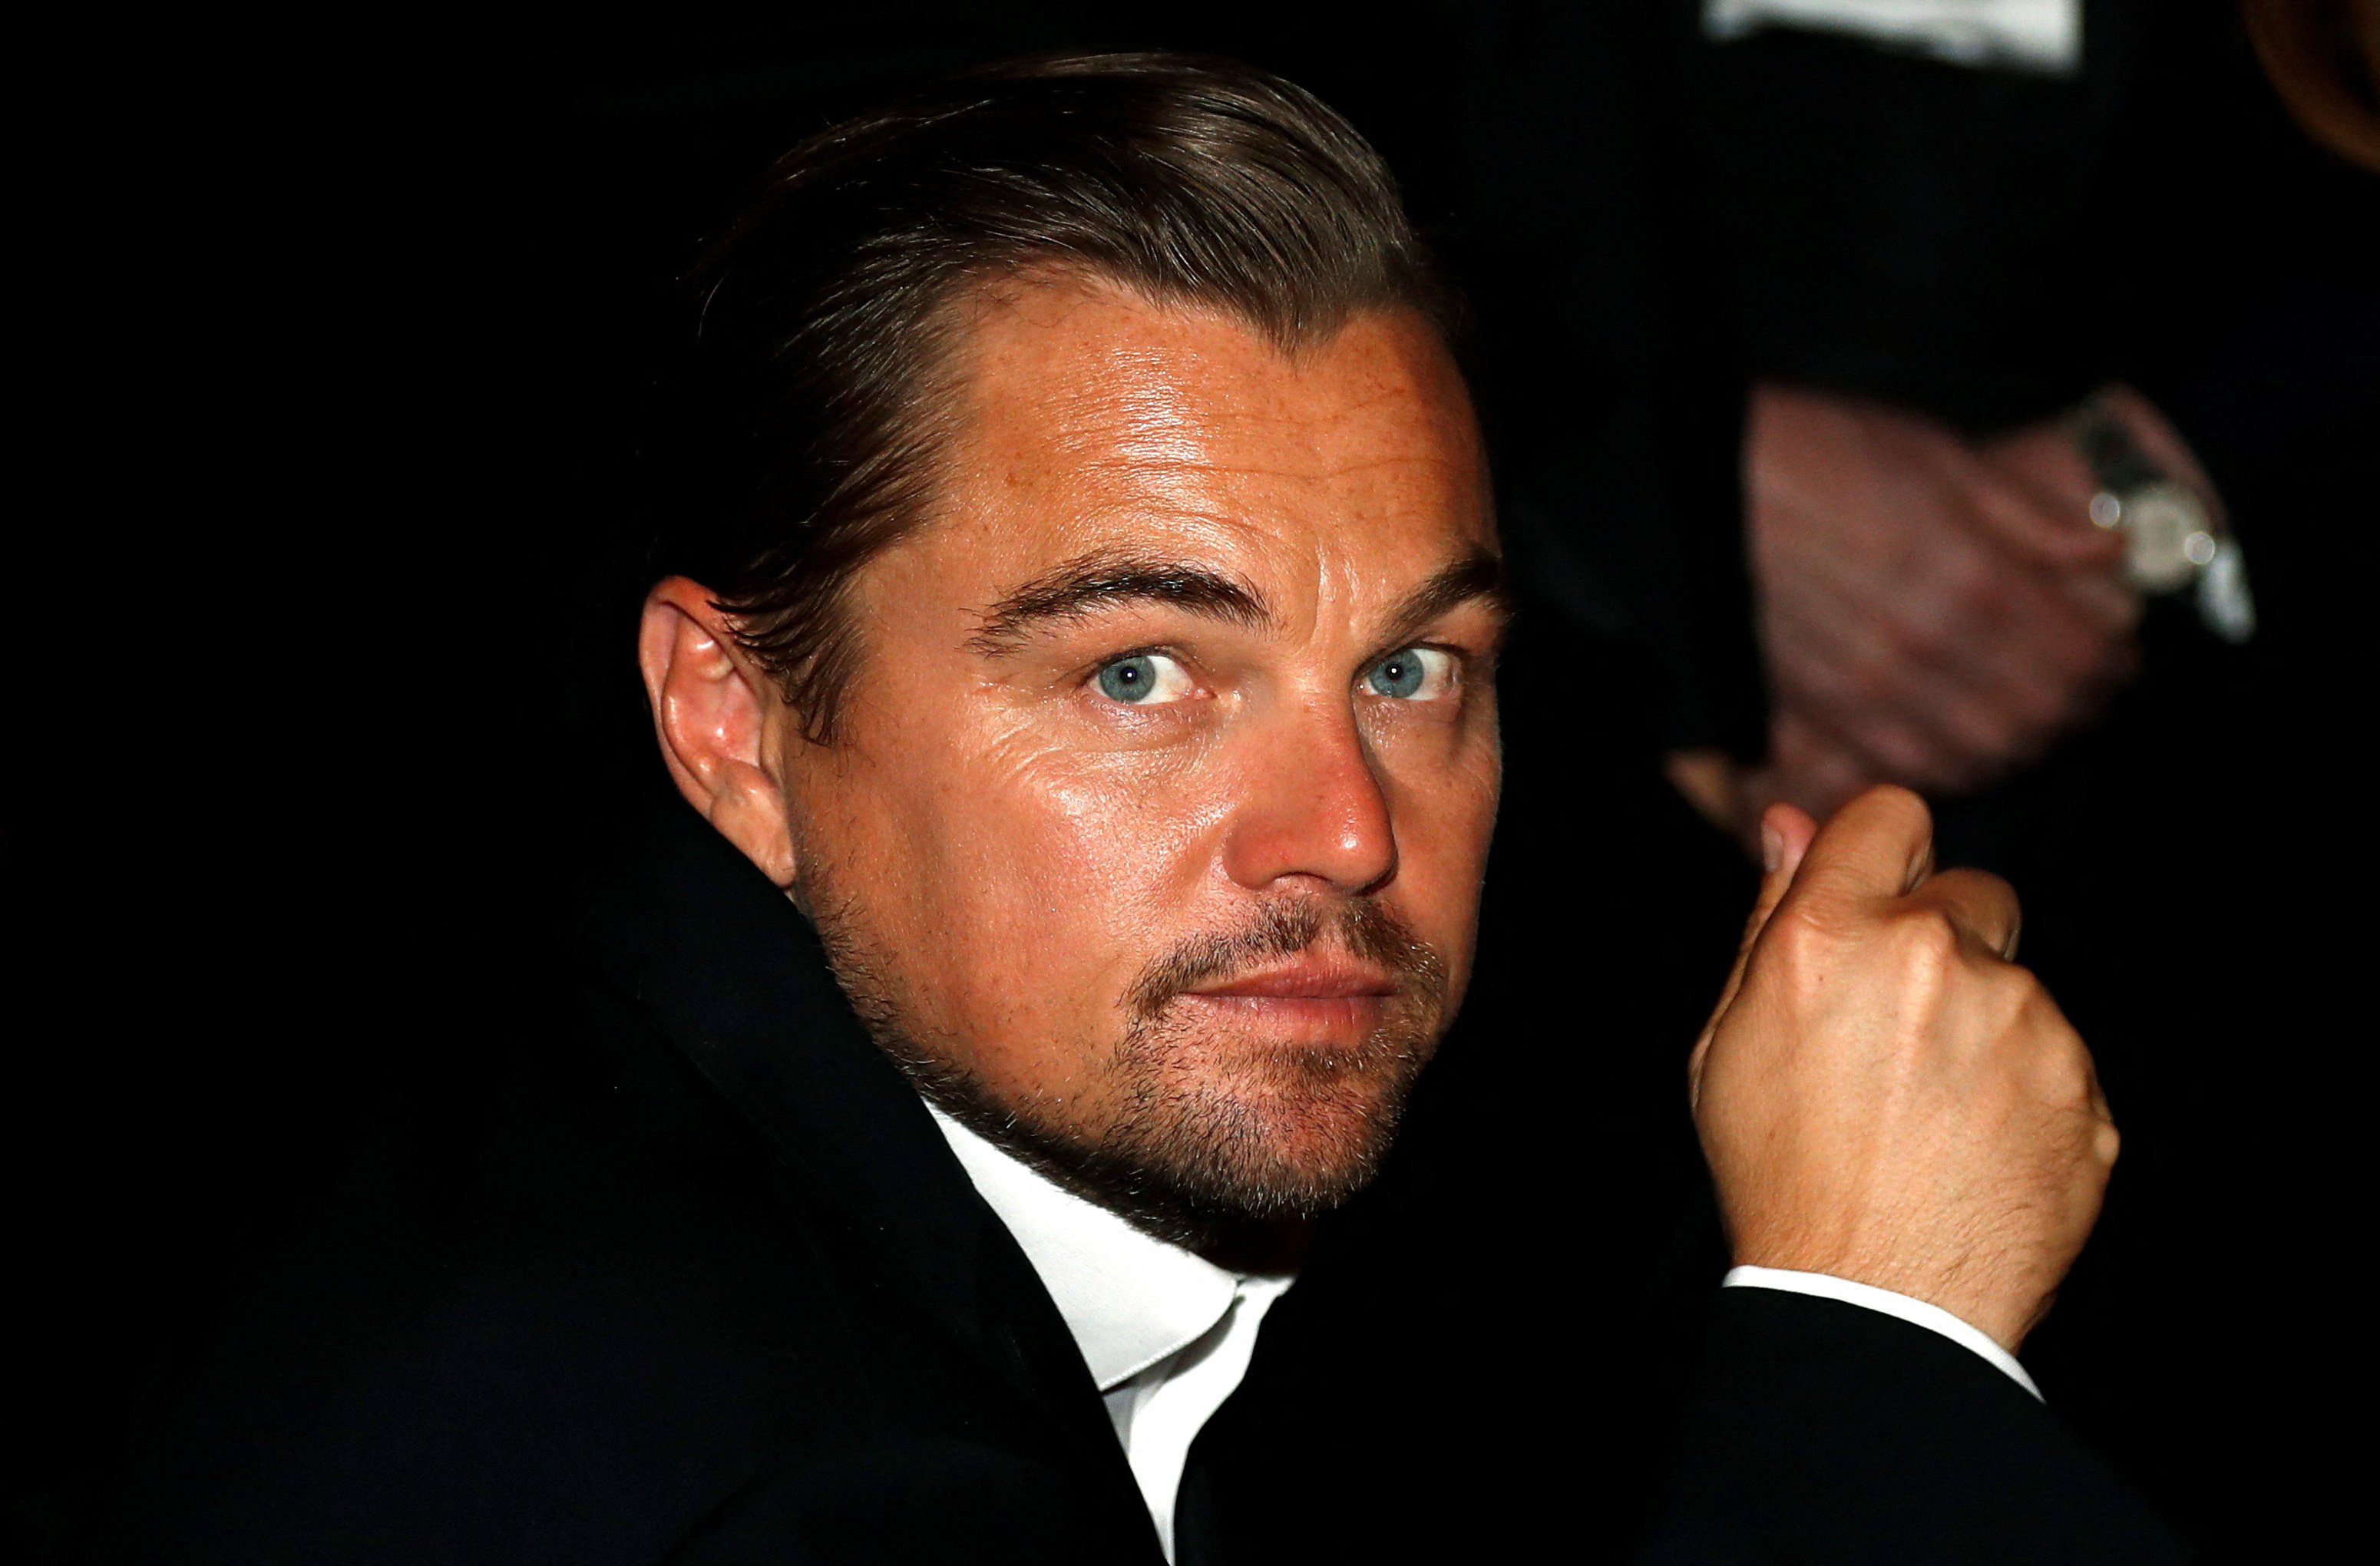 Actor Leonardo DiCaprio attends the Governors Ball following the 92nd Academy Awards in Los Angeles in February 2020. Photo: Reuters